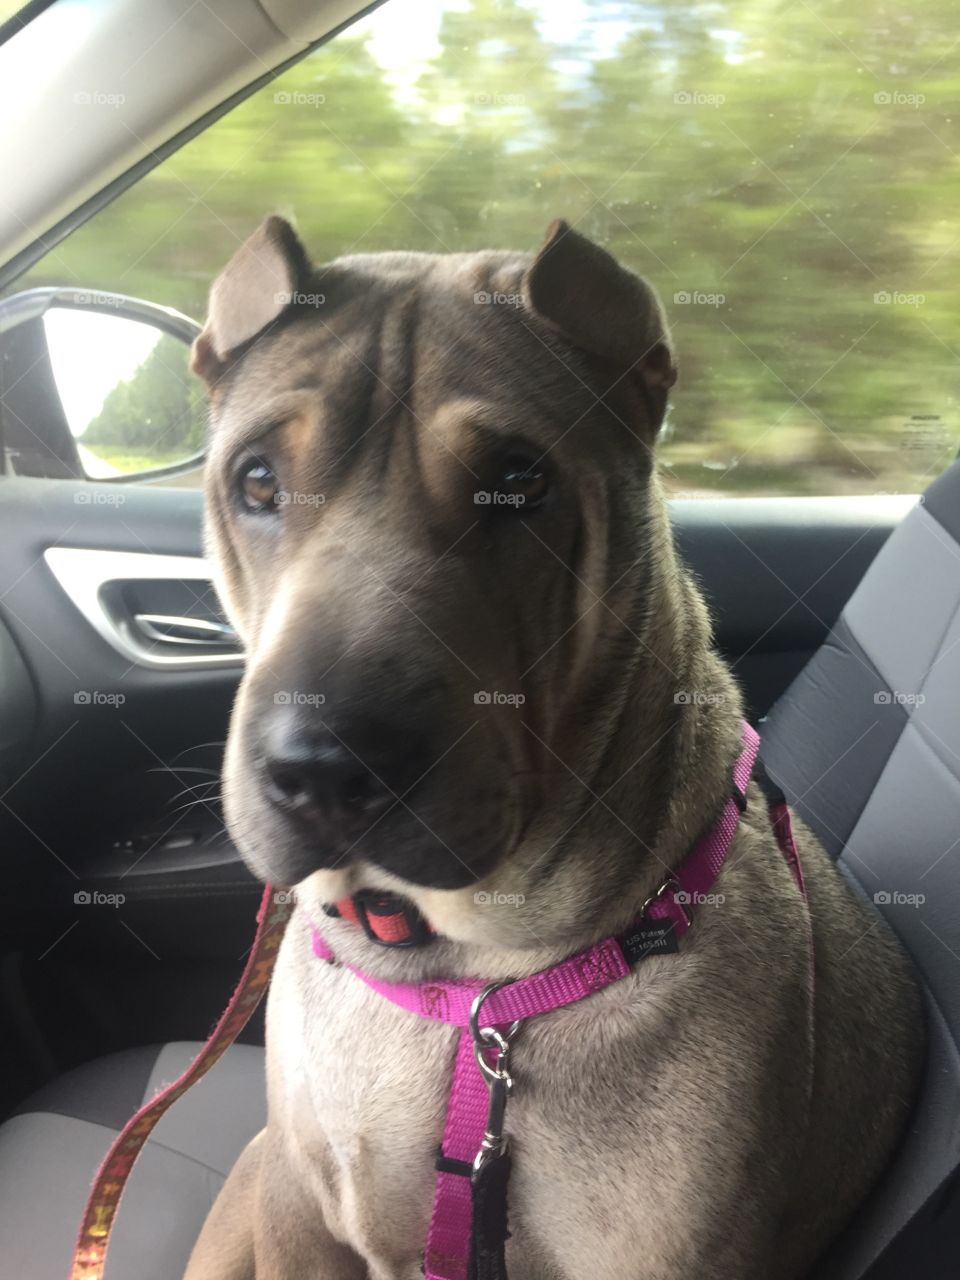 Tan dog riding in car with pink collar